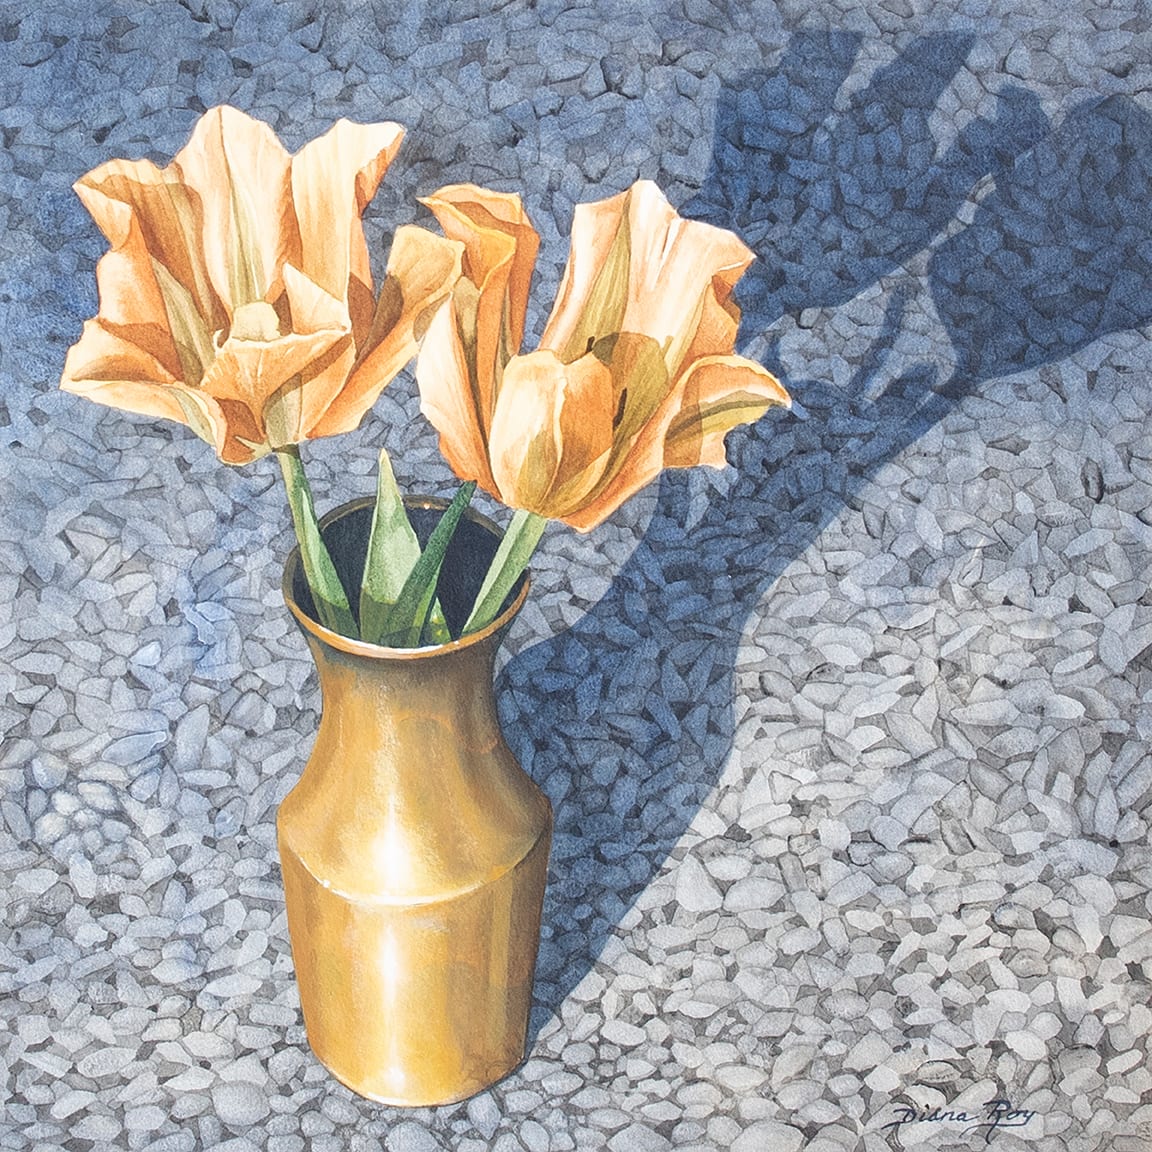 "Tulips" by Diana Roy 1940-2019 